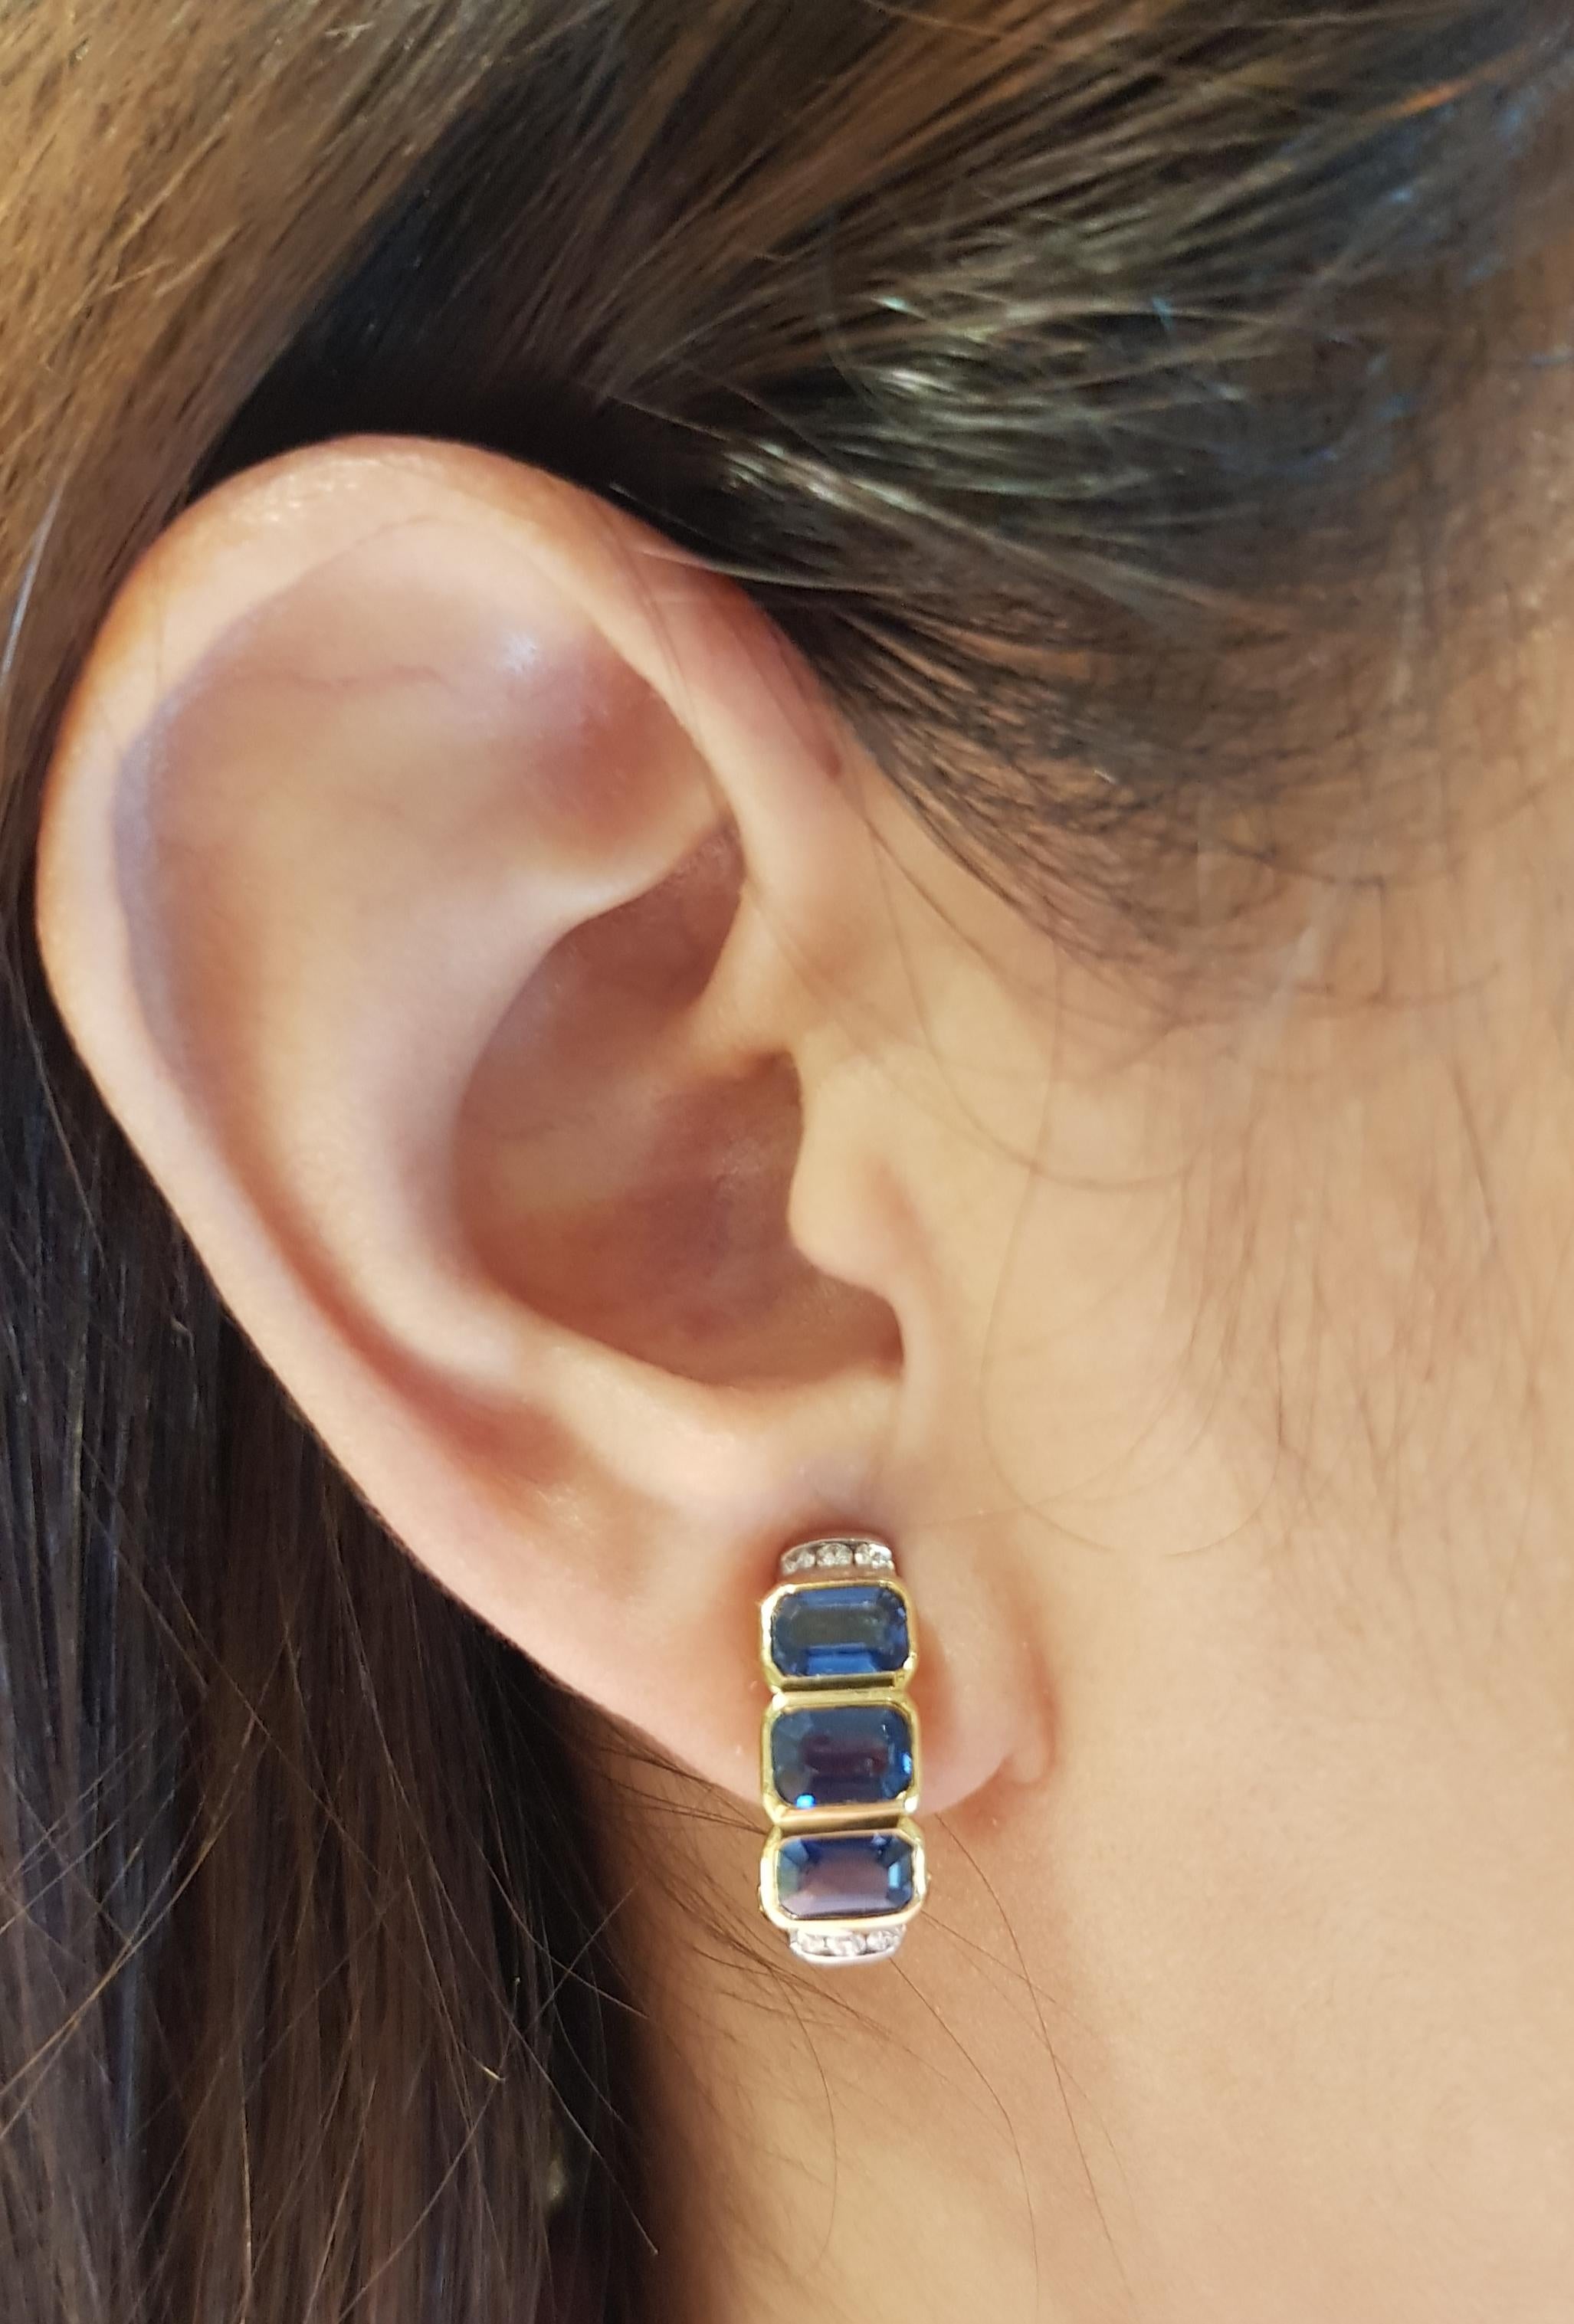 Blue Sapphire 3.49 carats with Diamond 0.09 carat Earrings set in 18 Karat Gold Settings

Width:  0.7 cm 
Length: 1.7 cm
Total Weight: 7.89 grams

